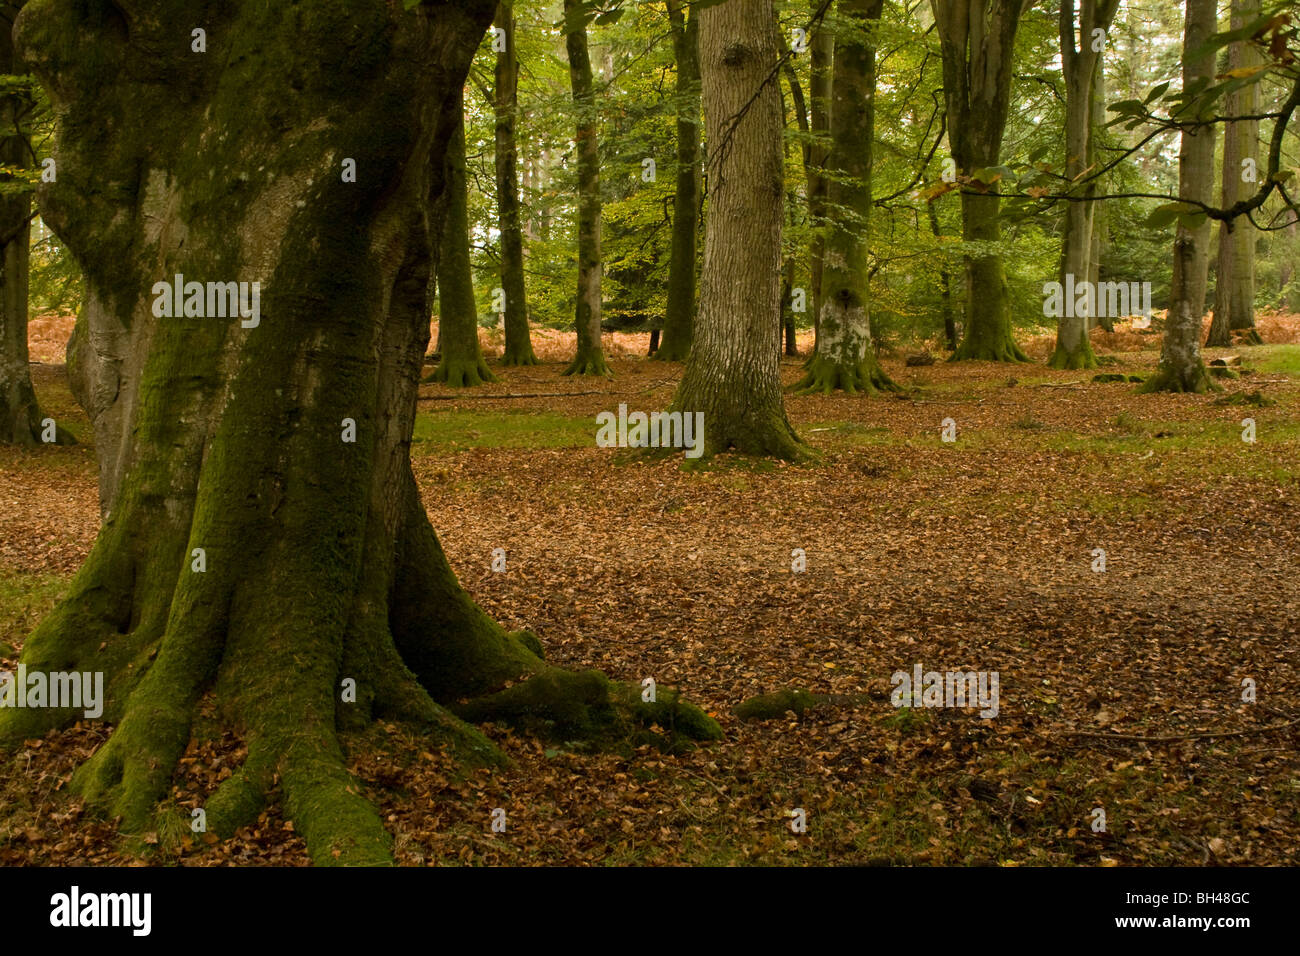 Woodland scene in the New Forest of a large smooth barked tree trunk in the foreground. Stock Photo